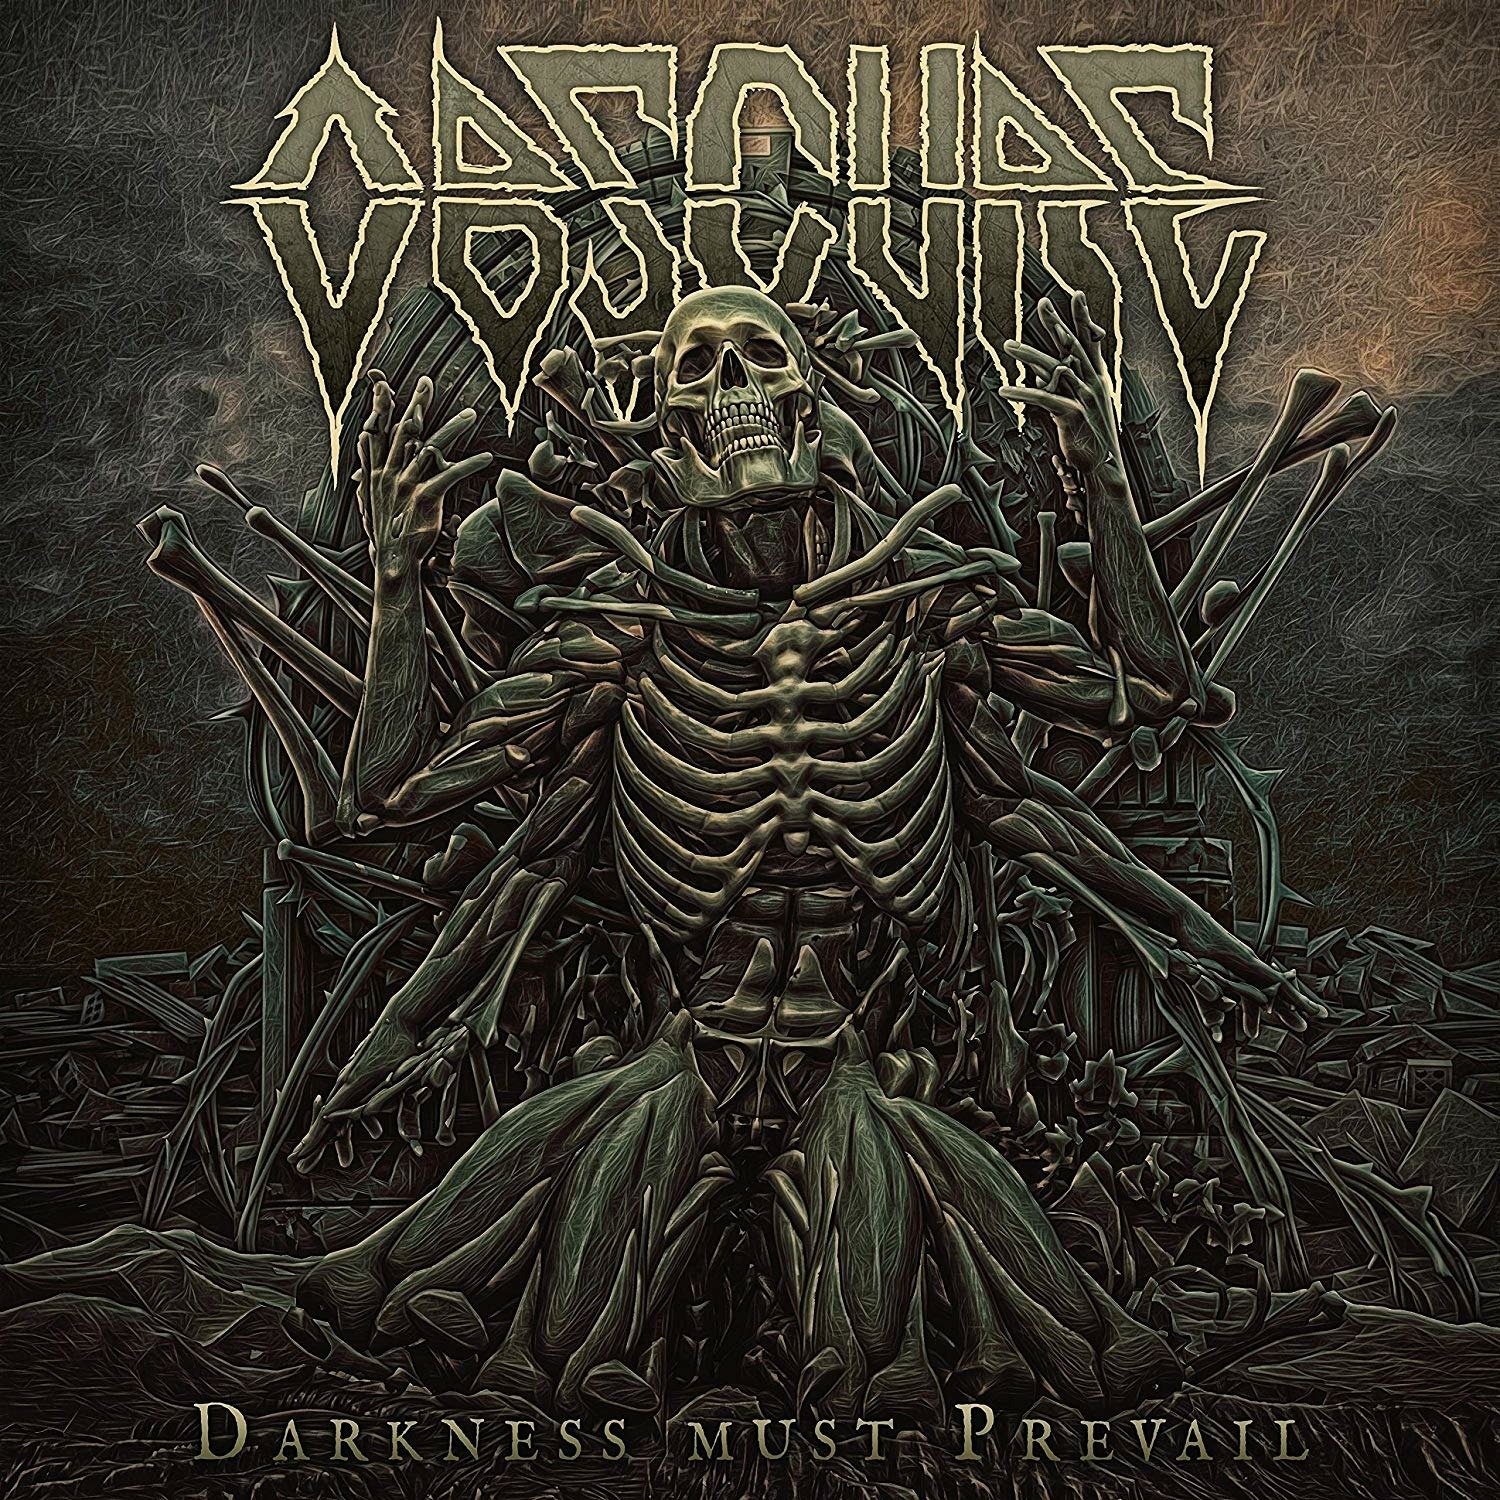 CD Shop - OBSCURE DARKNESS MUST PREVAIL